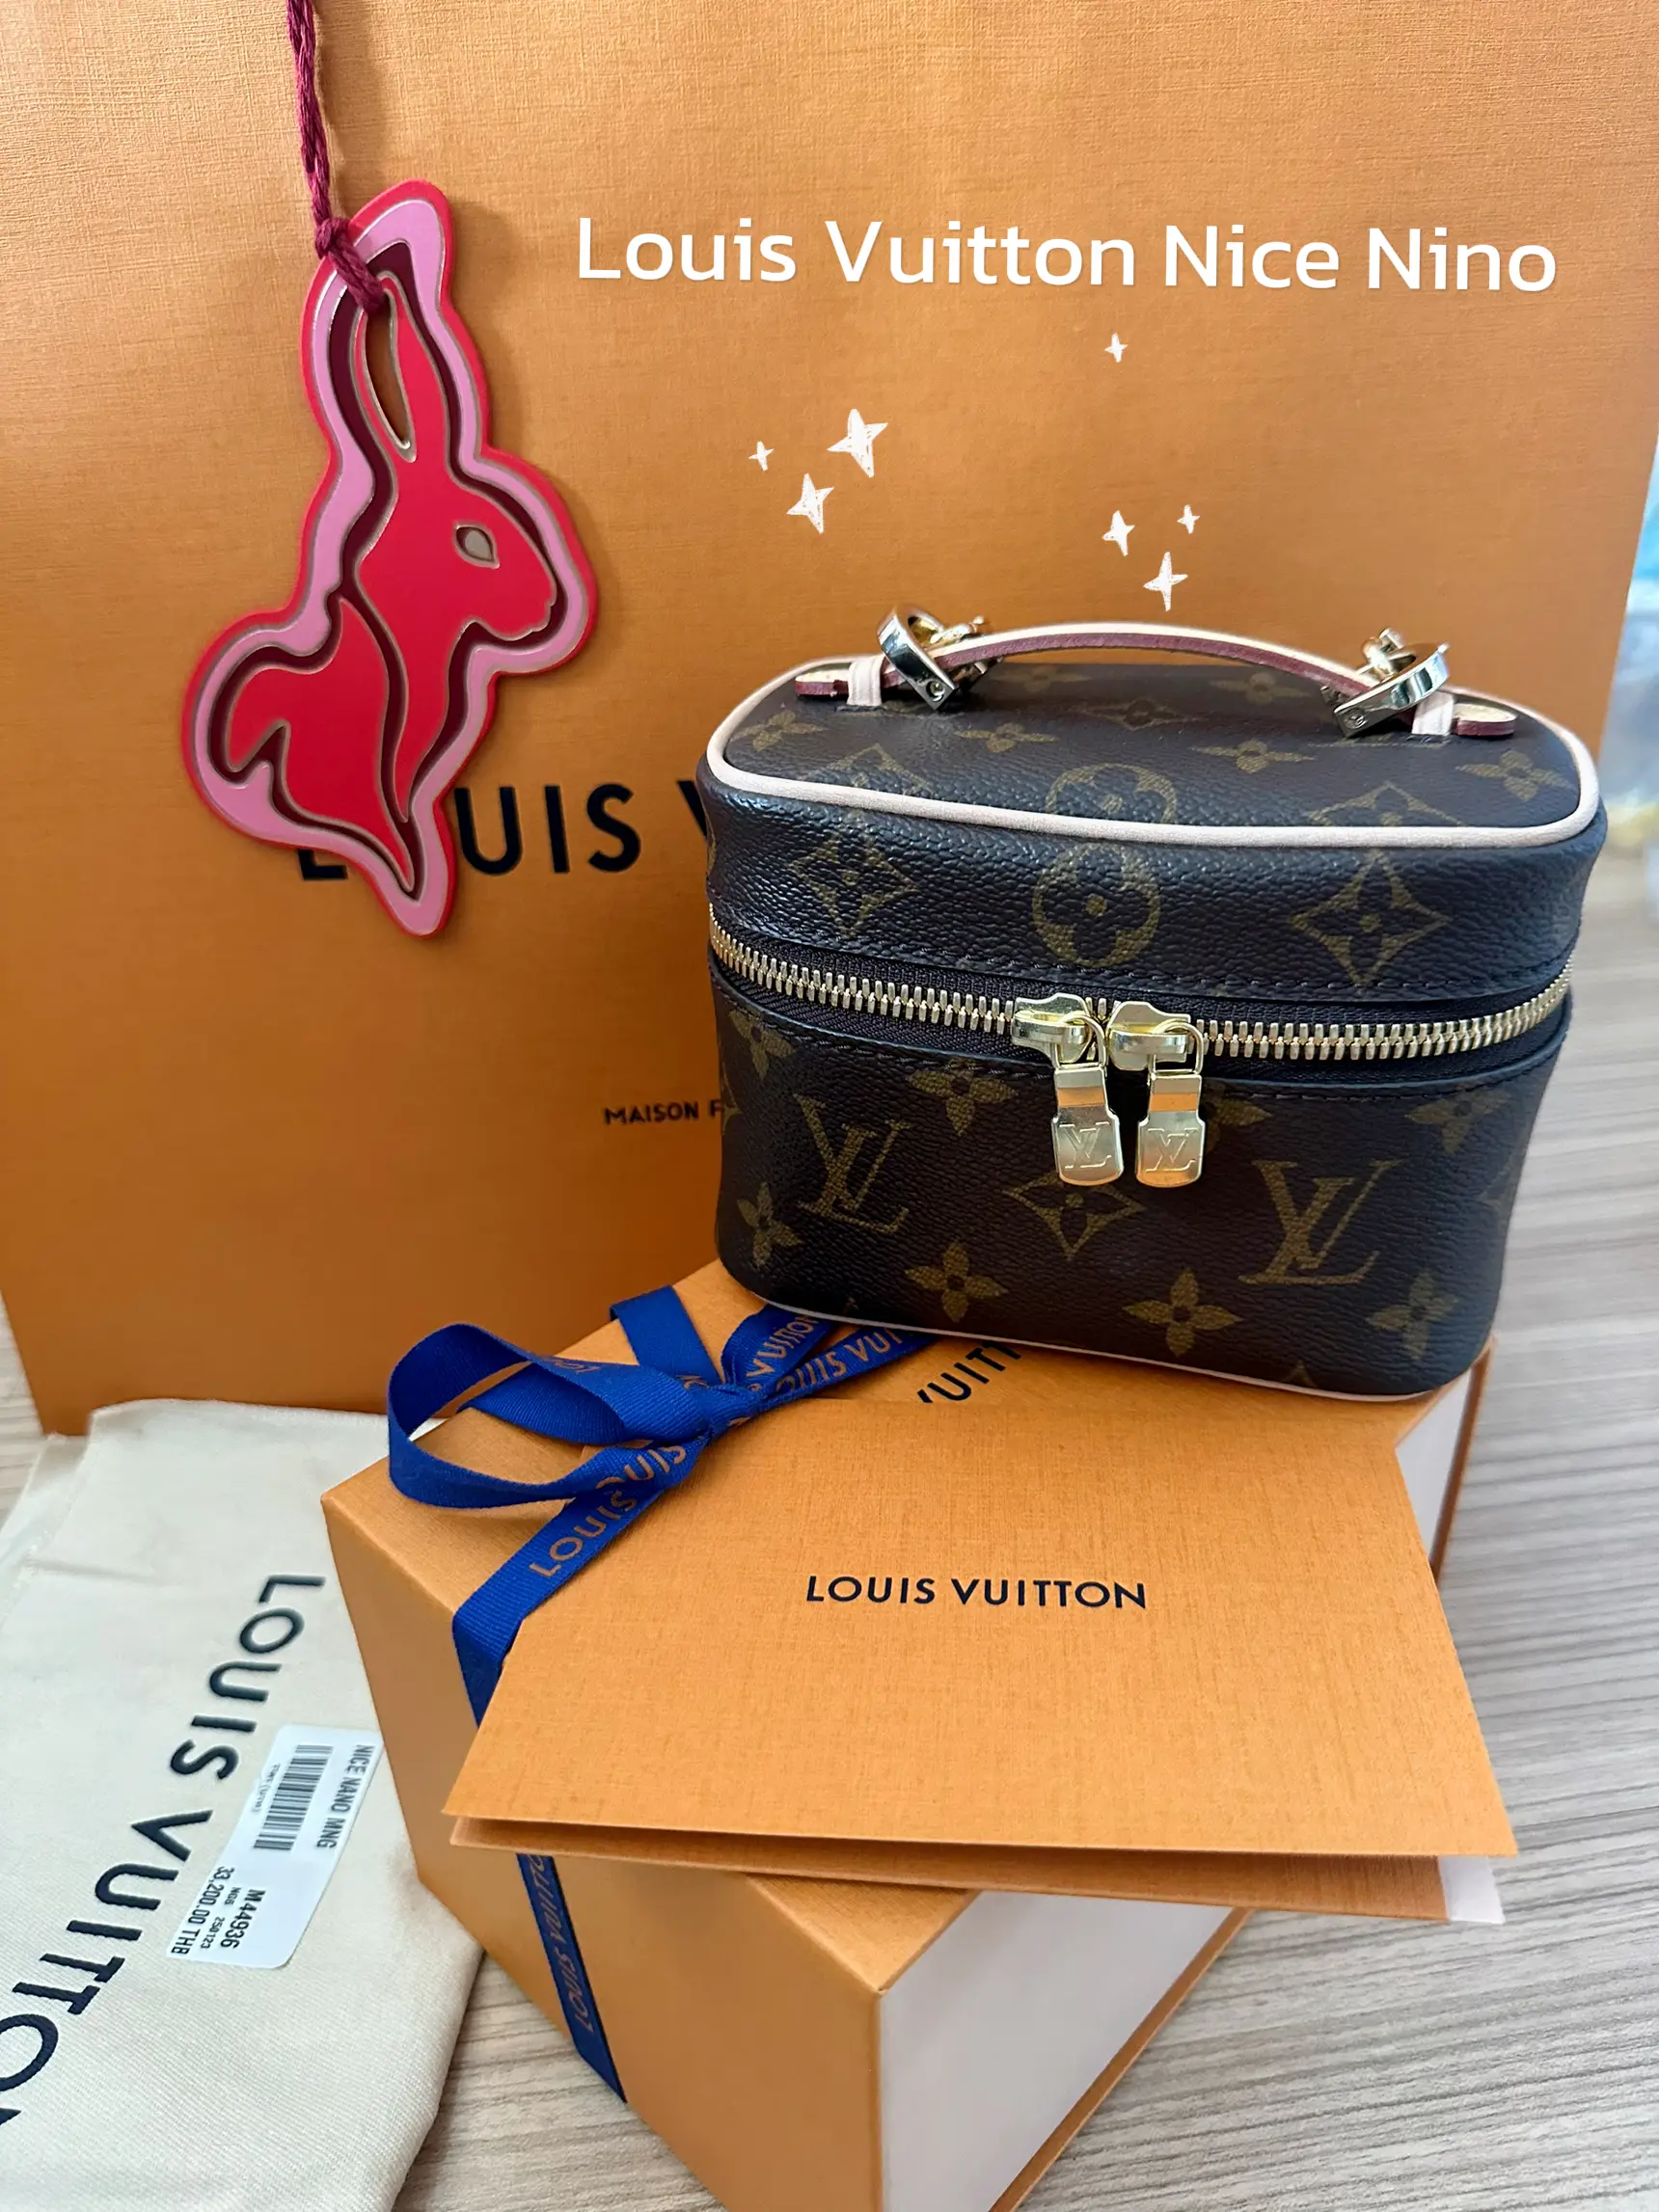 LV nice nano rarest bag now, Gallery posted by Primmii 🧸